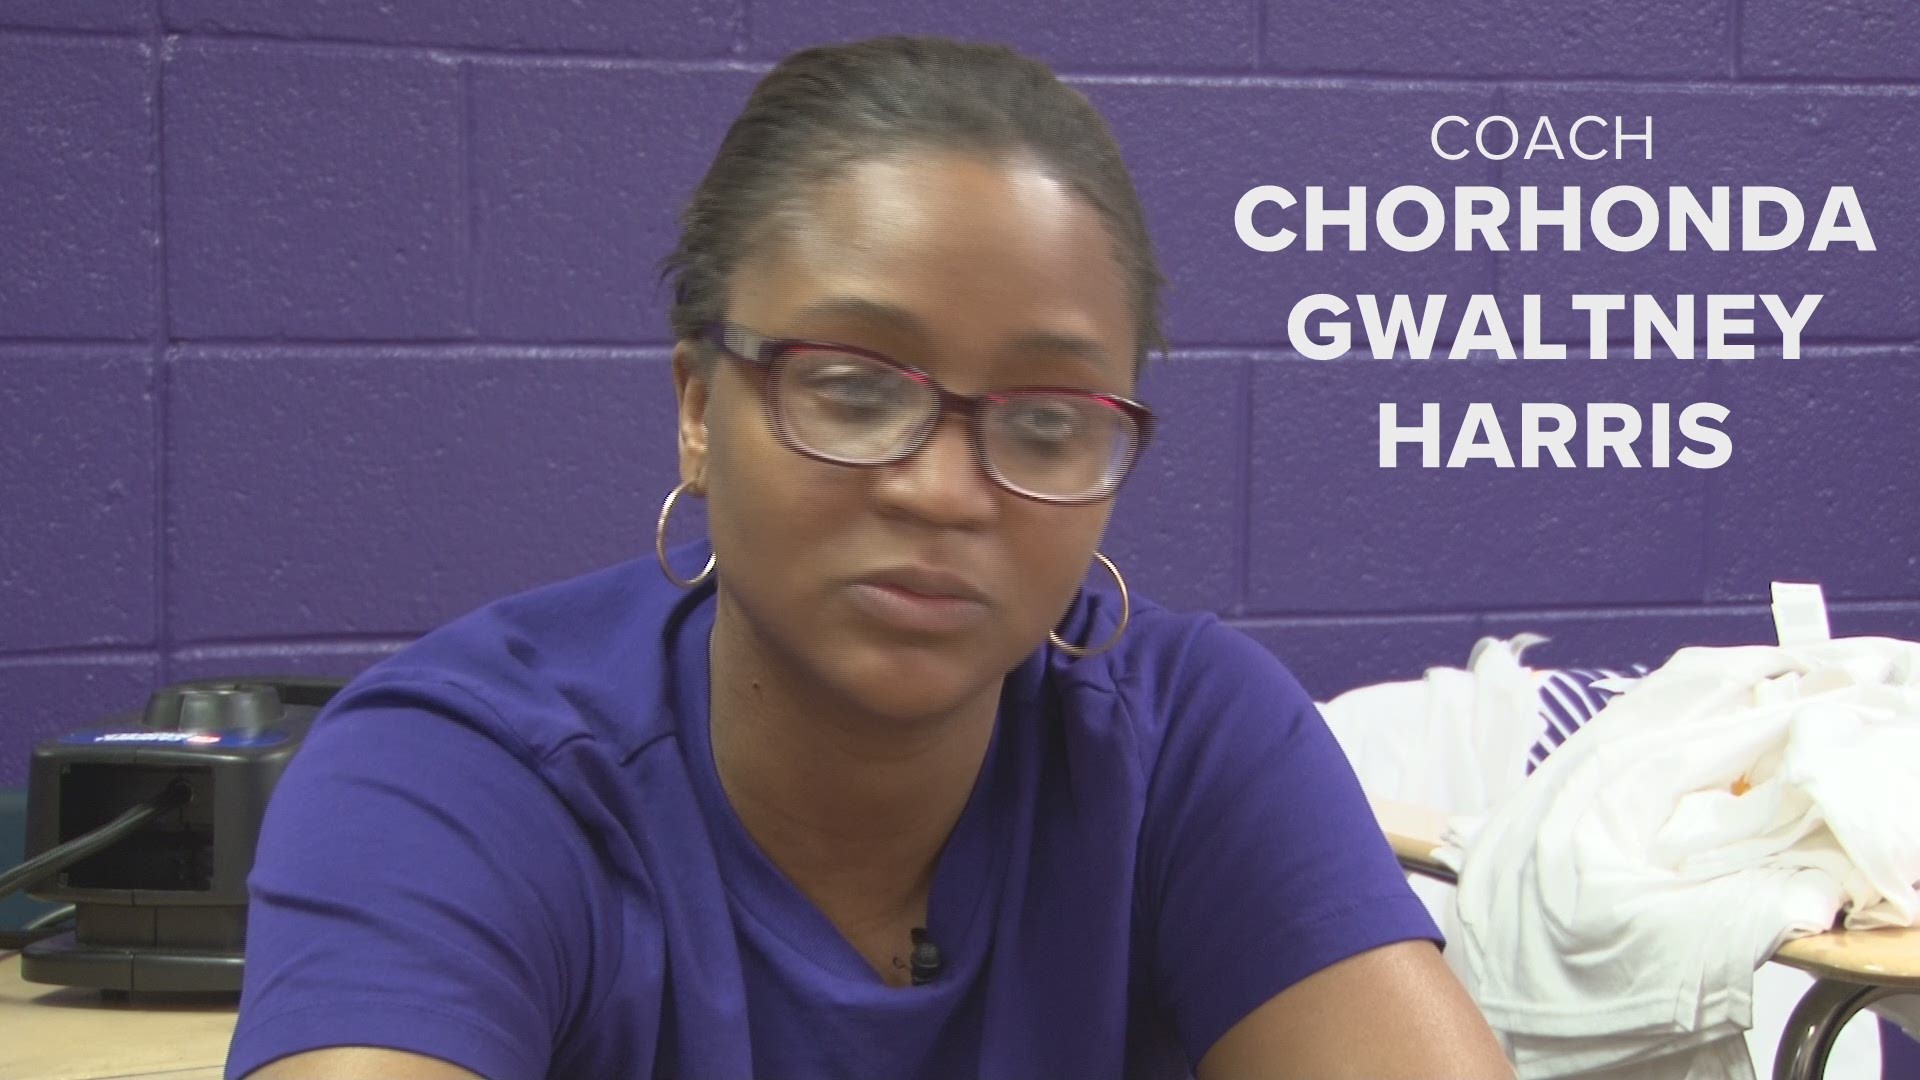 The only thing coaches ChoRhonda Gwaltney-Harris and Buck Harris love more than the game is each other.